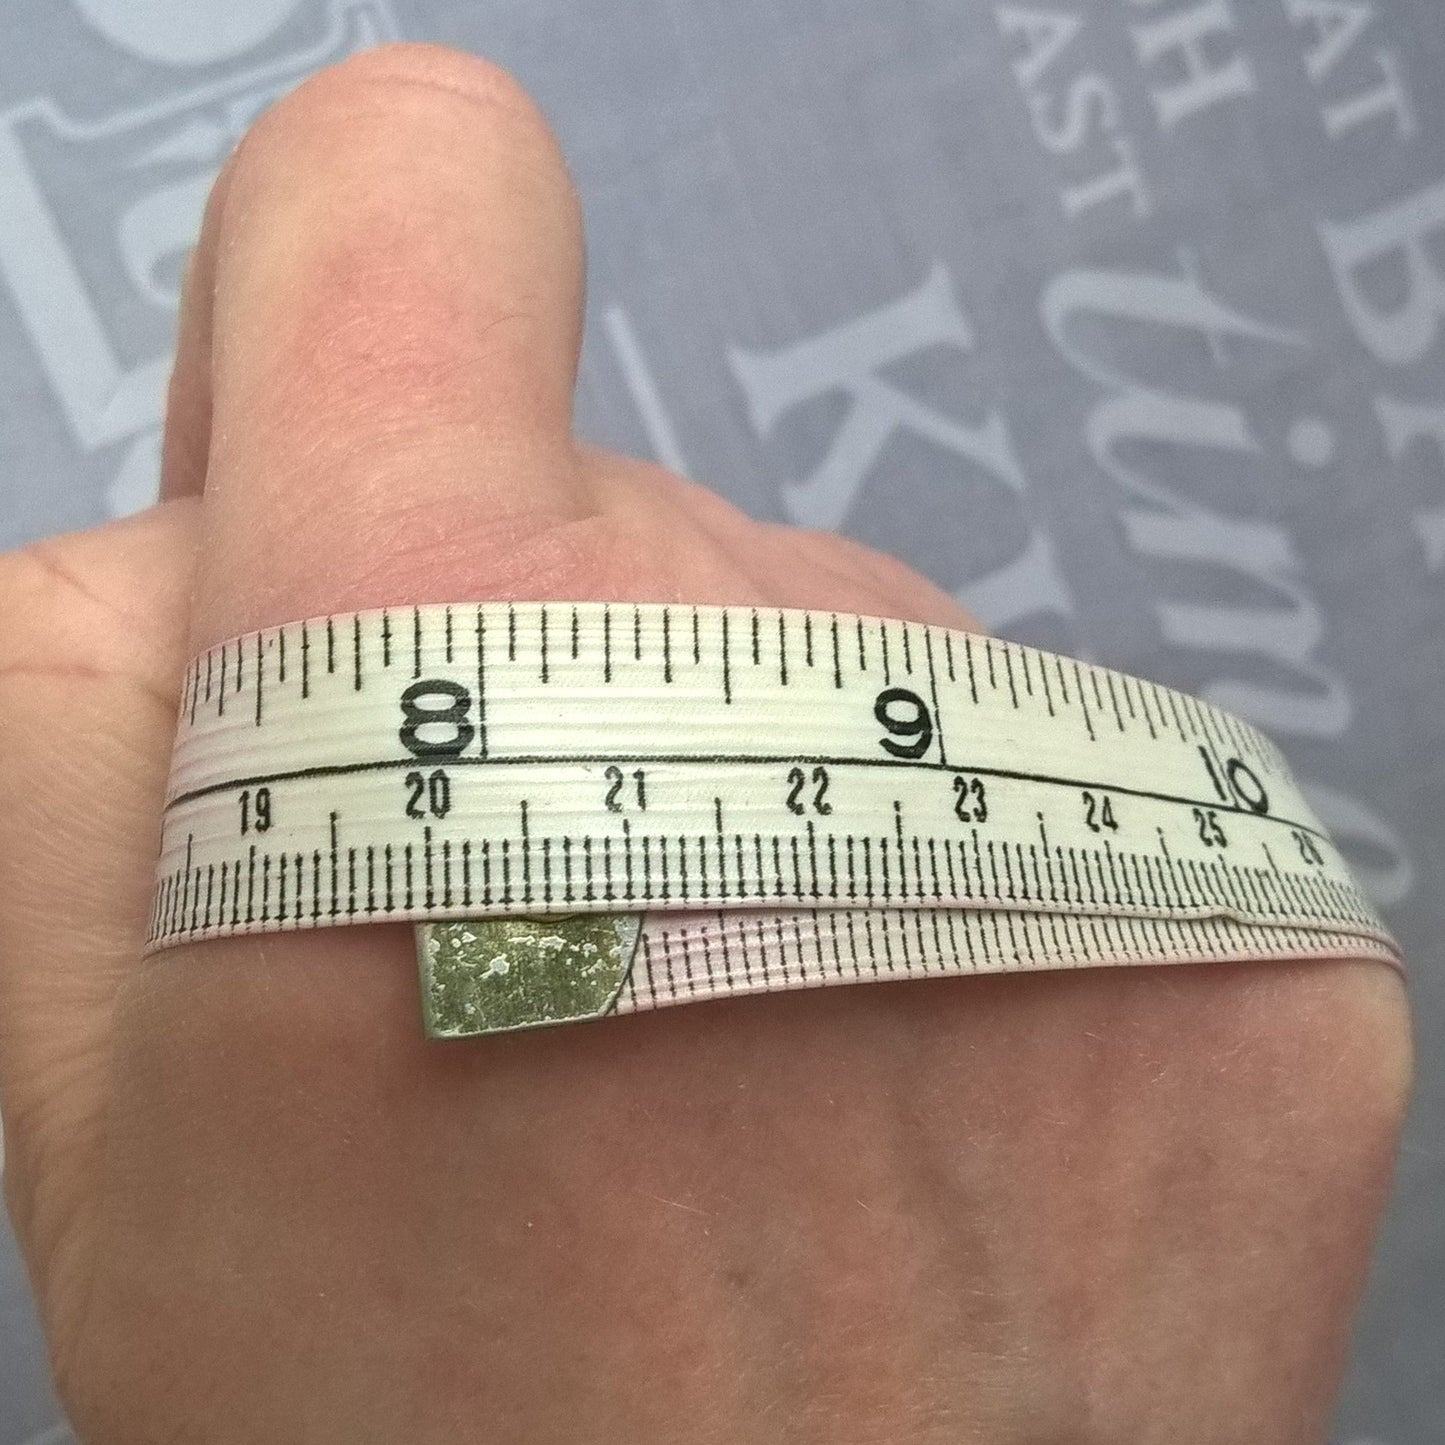 A guide on how to measure the hand for wrist warmer sizing